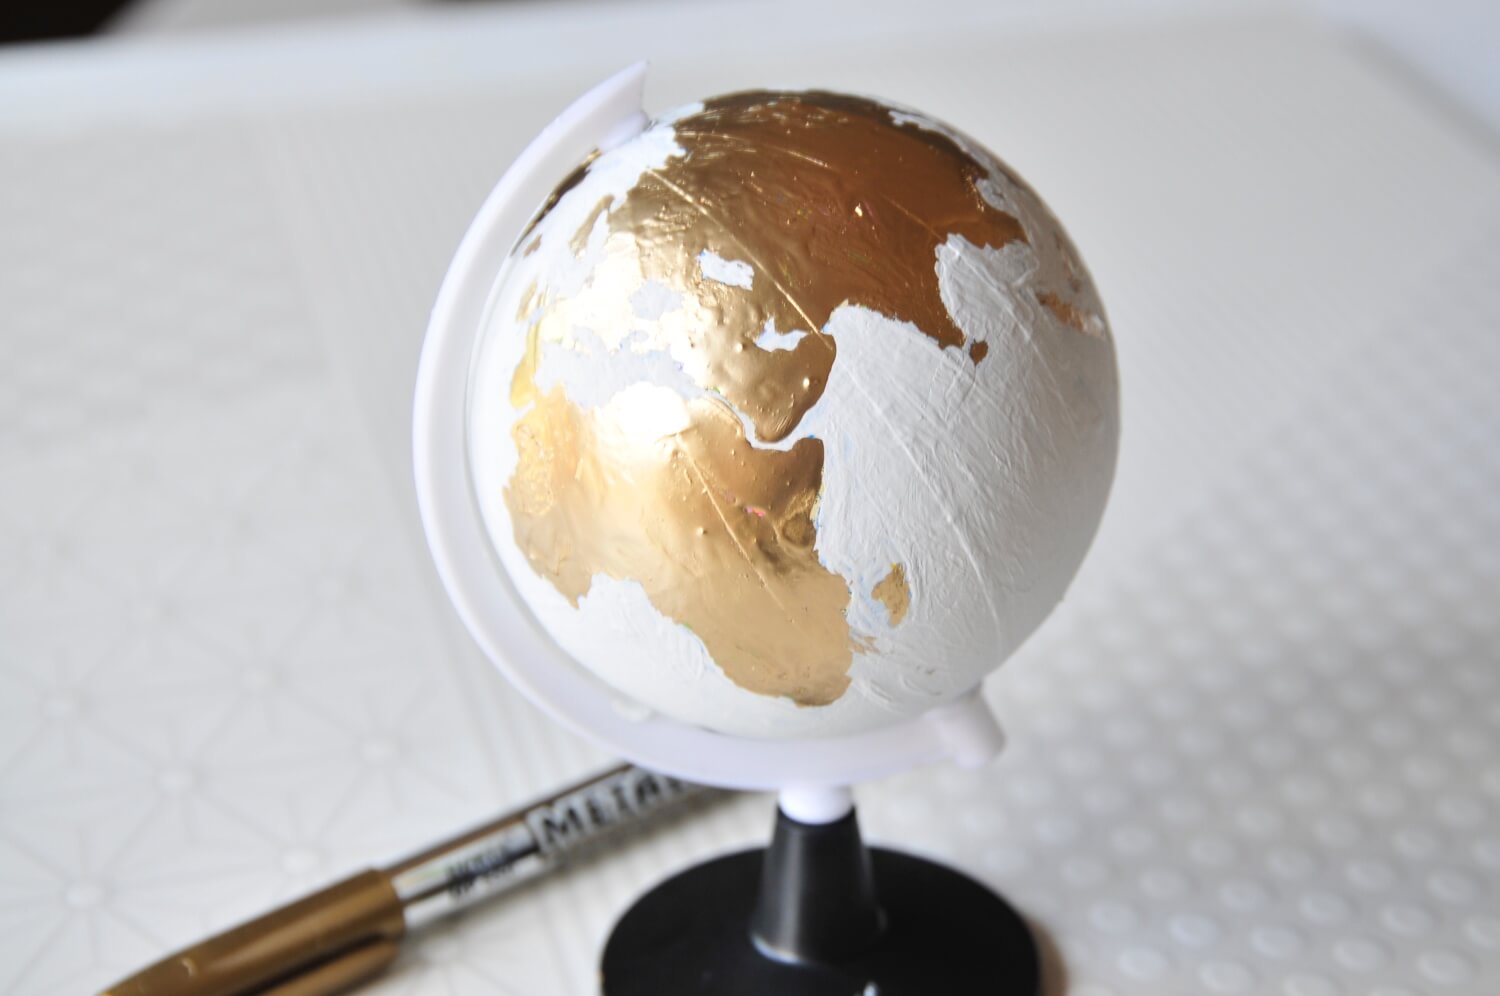 finished chalkboard painted globe craft tutorial - subscription box